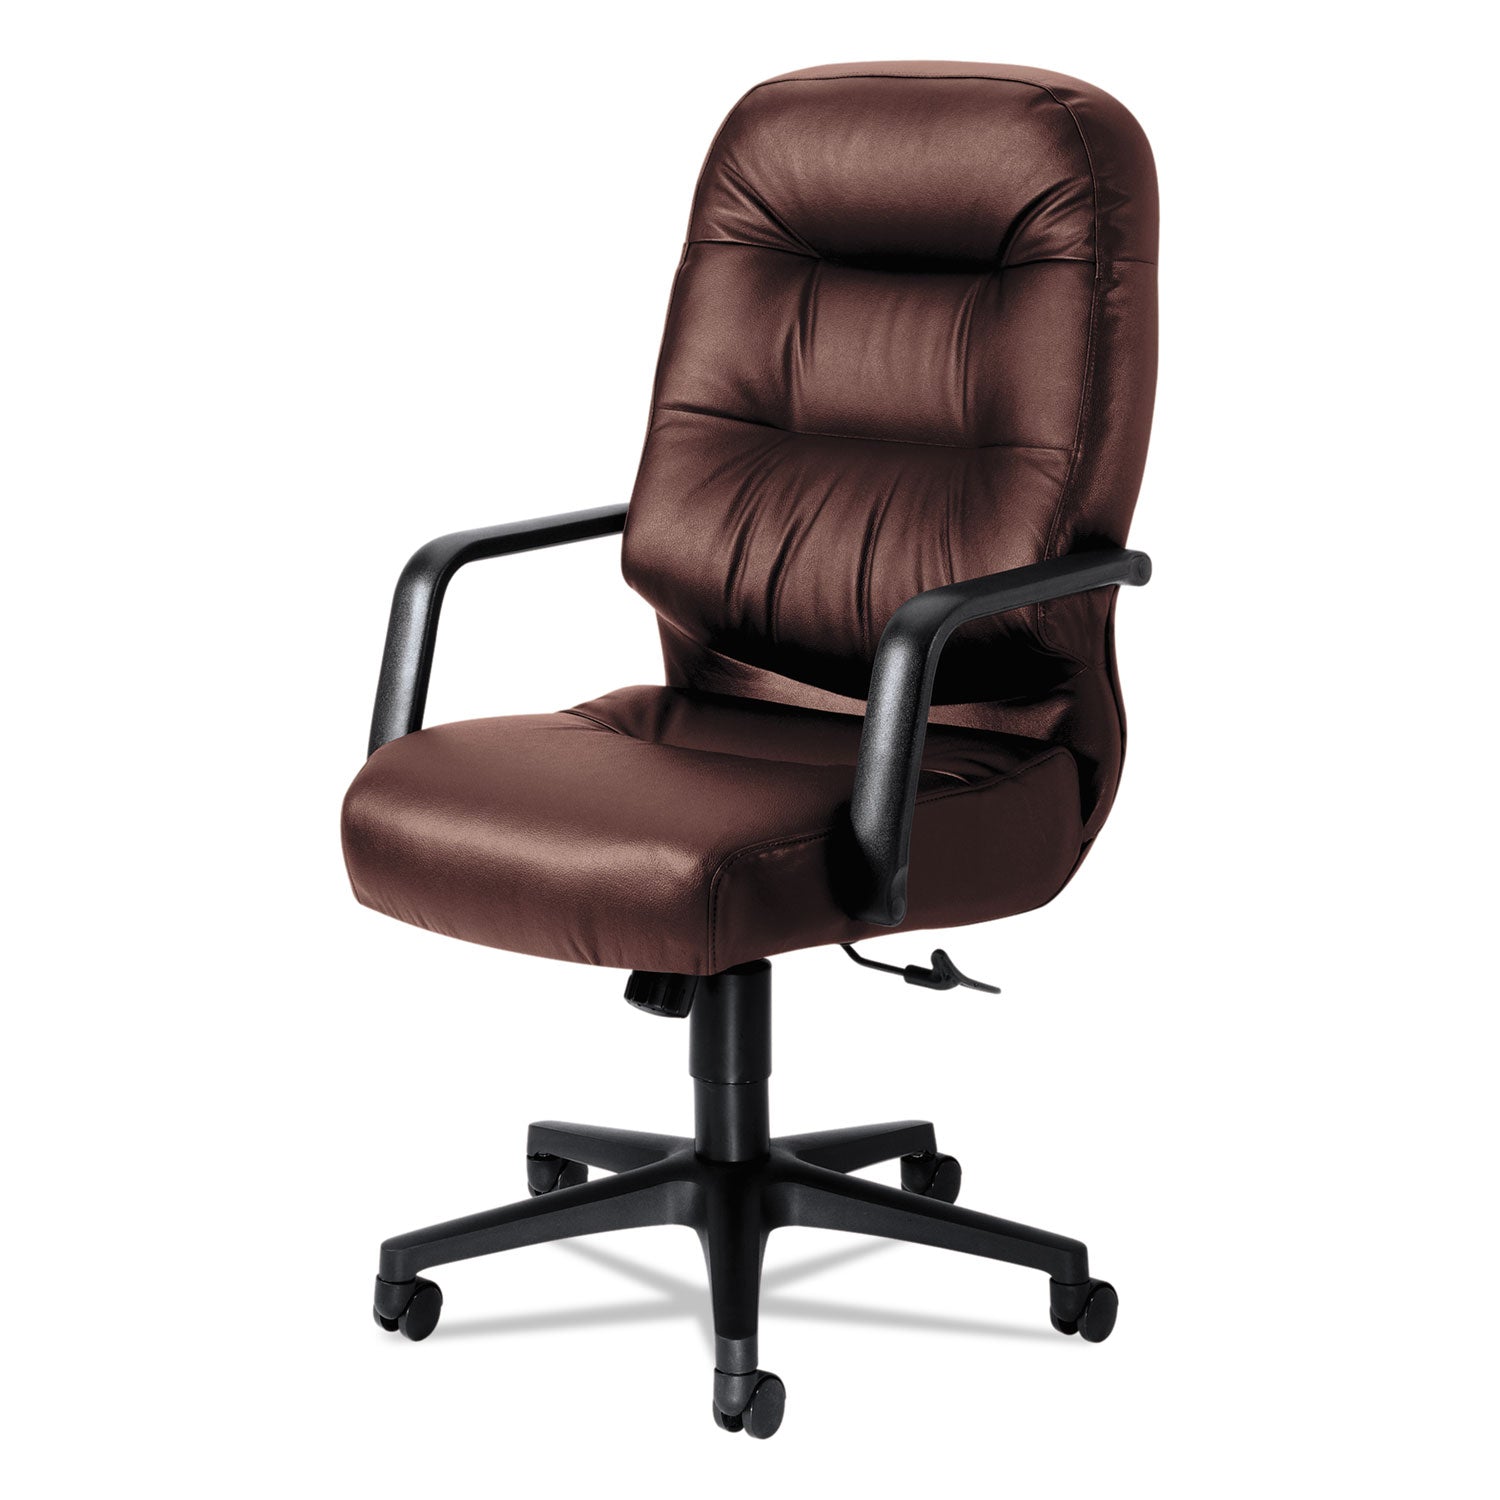 Pillow-Soft 2090 Series Executive High-Back Swivel/Tilt Chair, Supports 300 lb, 16.75" to 21.25" Seat, Burgundy, Black Base - 